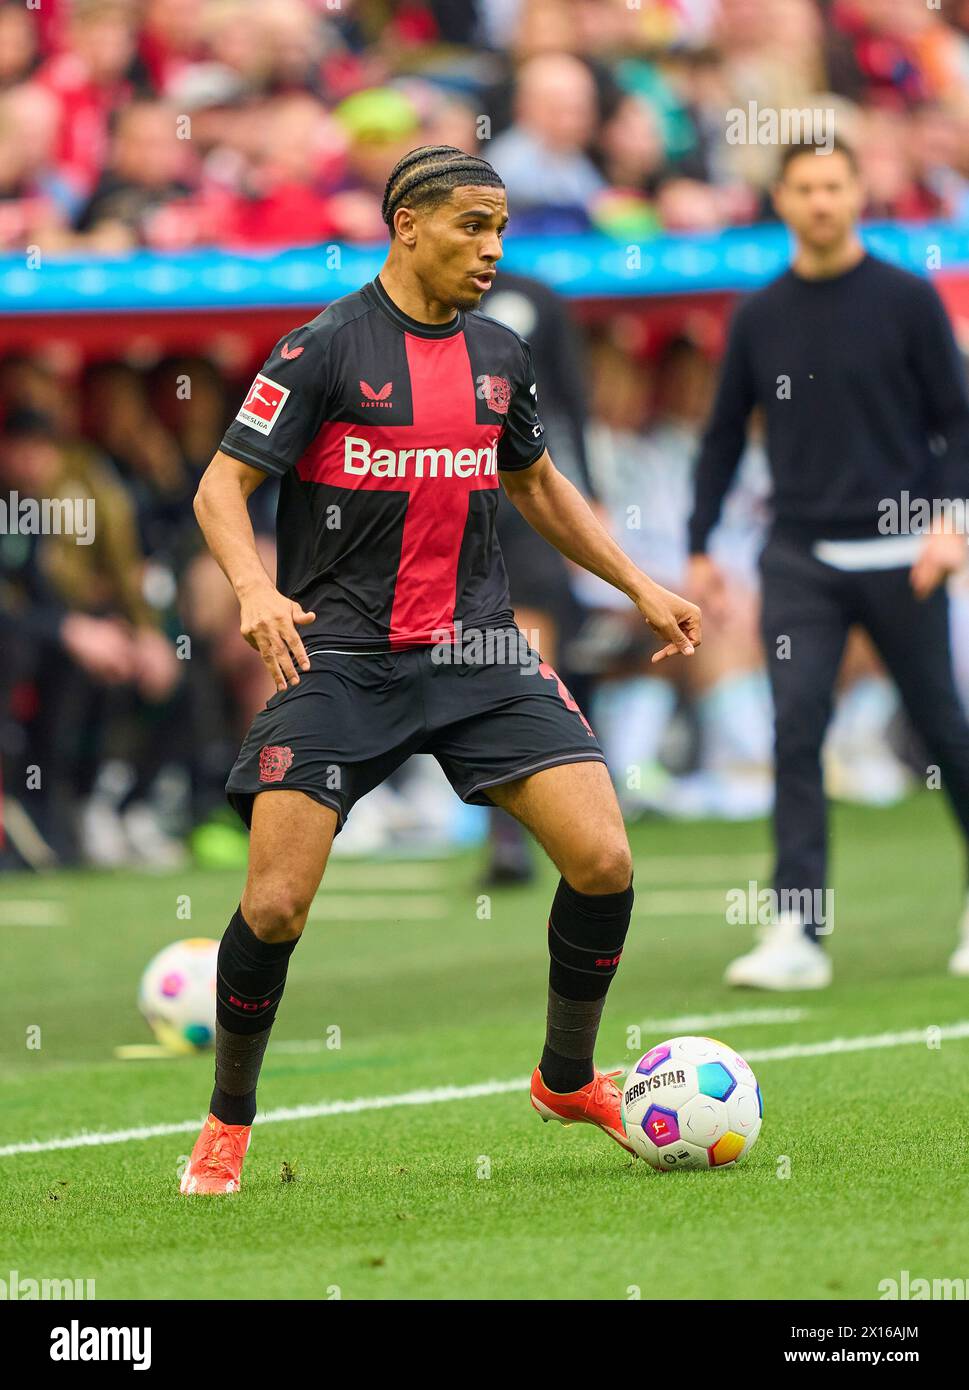 Amine Adli, Lev 21   in the match BAYER 04 LEVERKUSEN - SV WERDER BREMEN 5-0   on April 14, 2024 in Leverkusen, Germany. Season 2023/2024, 1.Bundesliga,, matchday 29, 29.Spieltag Photographer: ddp images / star-images    - DFL REGULATIONS PROHIBIT ANY USE OF PHOTOGRAPHS as IMAGE SEQUENCES and/or QUASI-VIDEO - Stock Photo